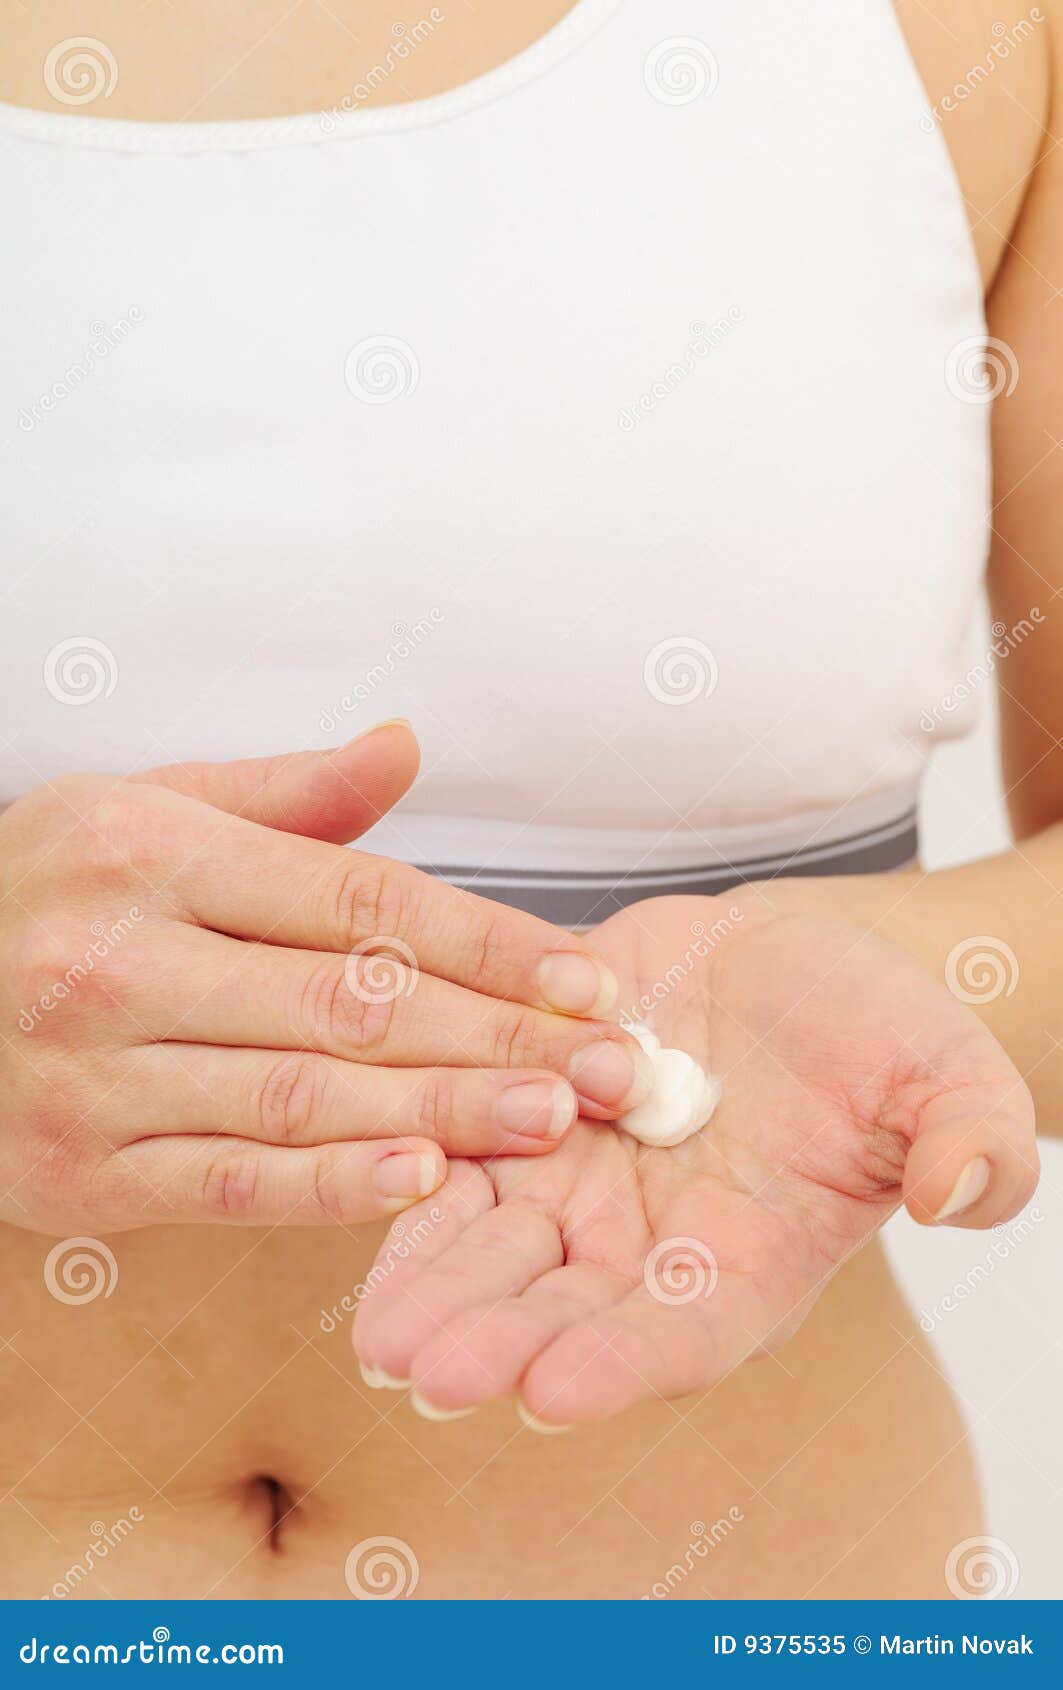 Treatment Of Dry Hands Skin Stock Image - Image of health  